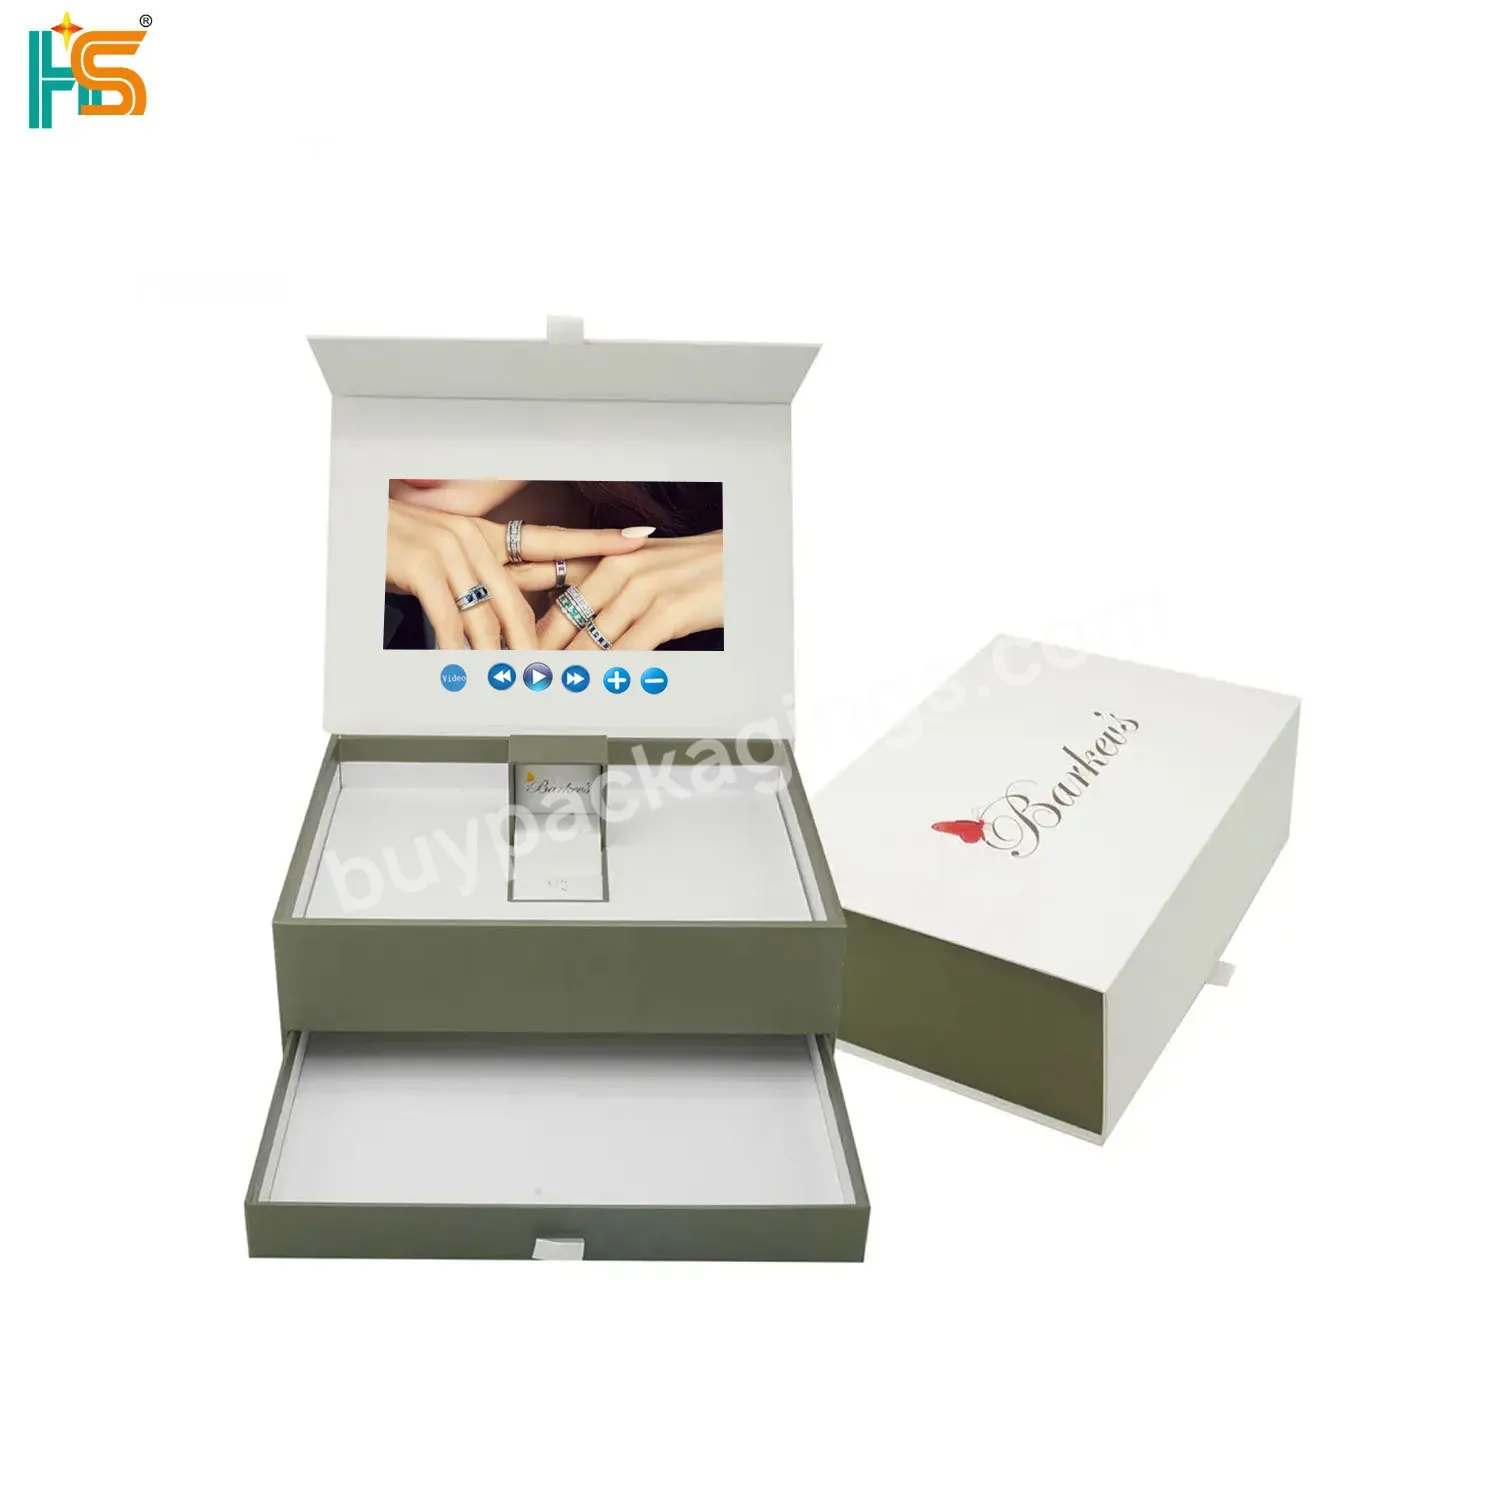 Customized 4.3 Inch Lcd Screen Light Control Video Card Gift Box Invitation Video Packaging Box For Jewelry